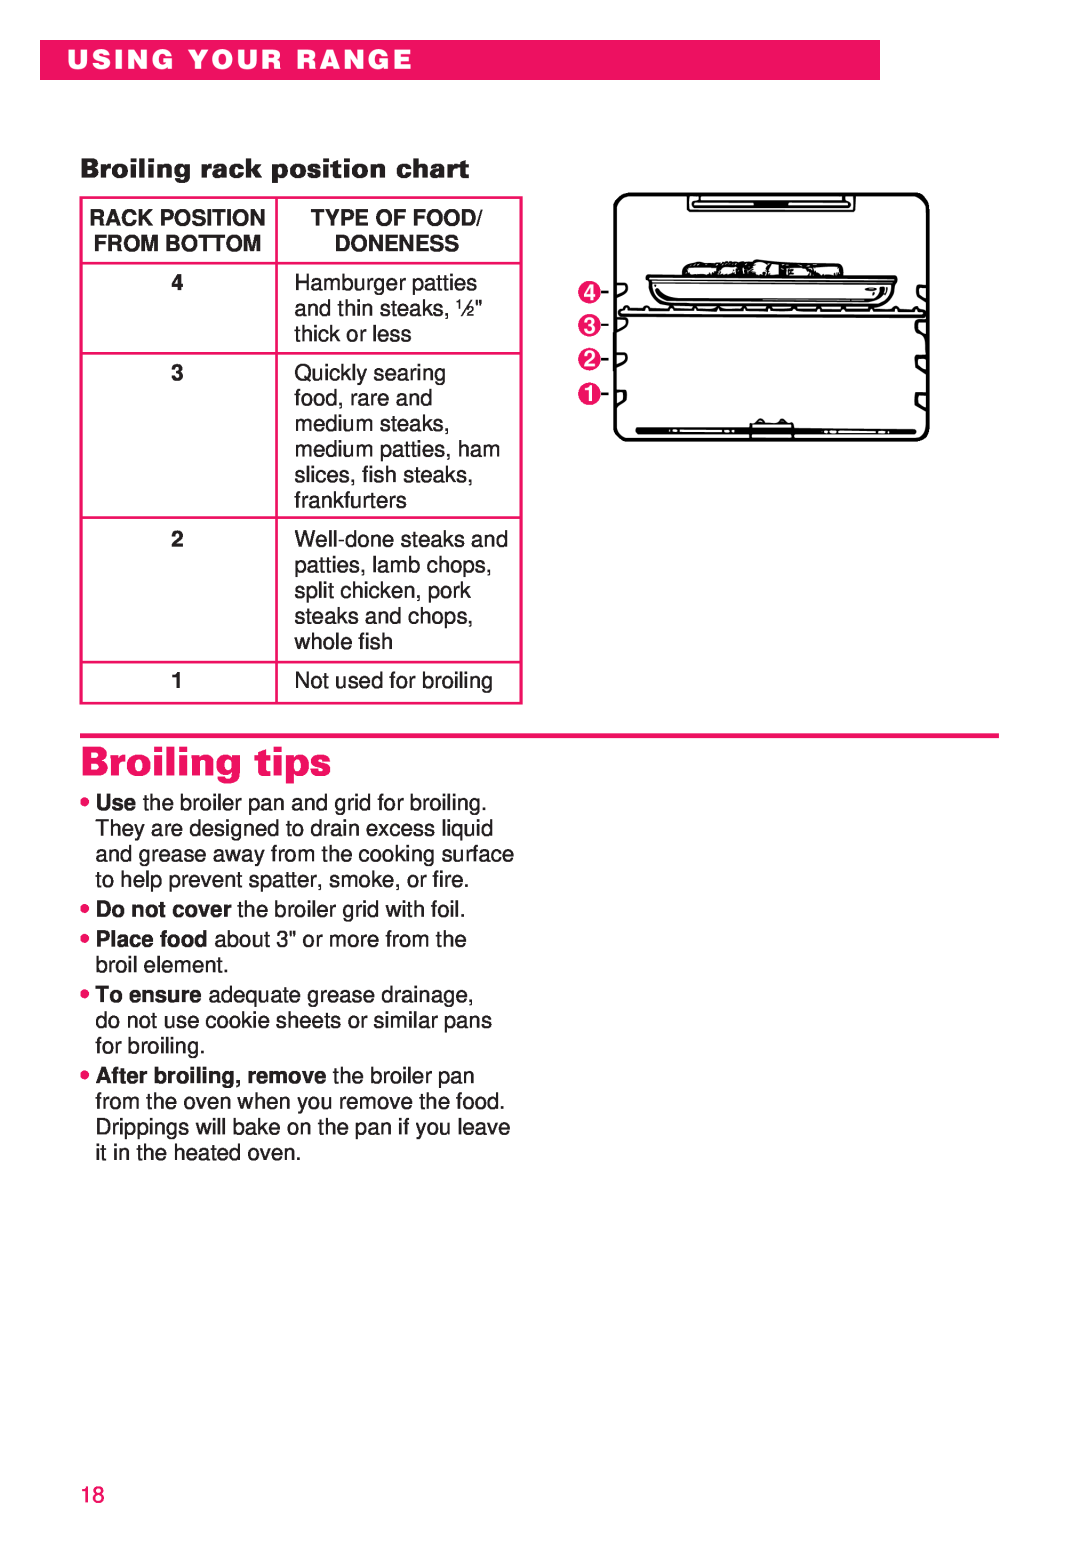 Whirlpool RS386PXE important safety instructions Broiling tips, Broiling rack position chart, Using Your Range 